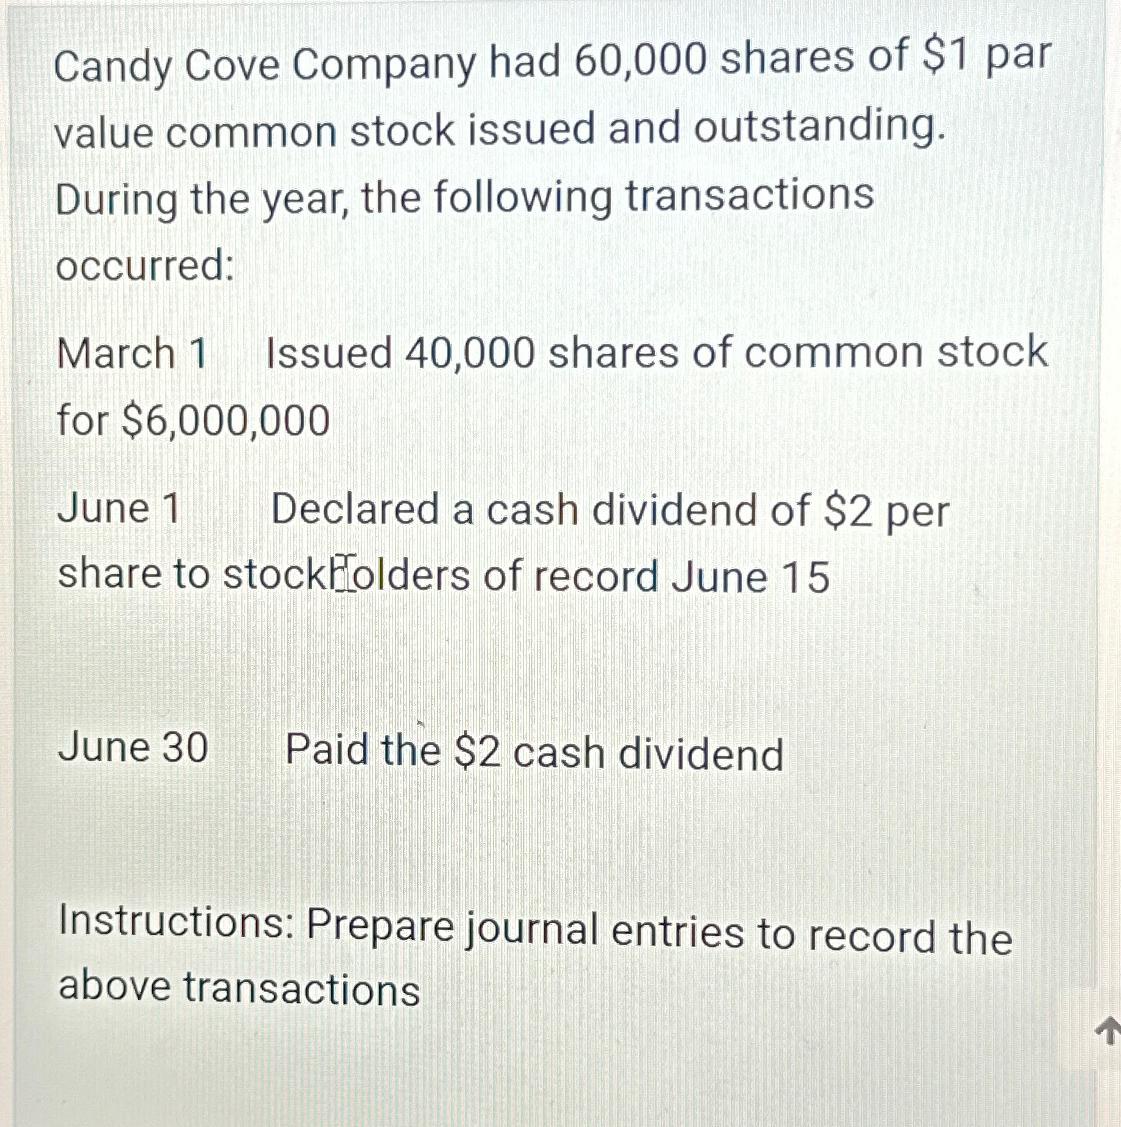 Candy Cove Company had 60,000 shares of $1 par value common stock issued and outstanding. During the year,